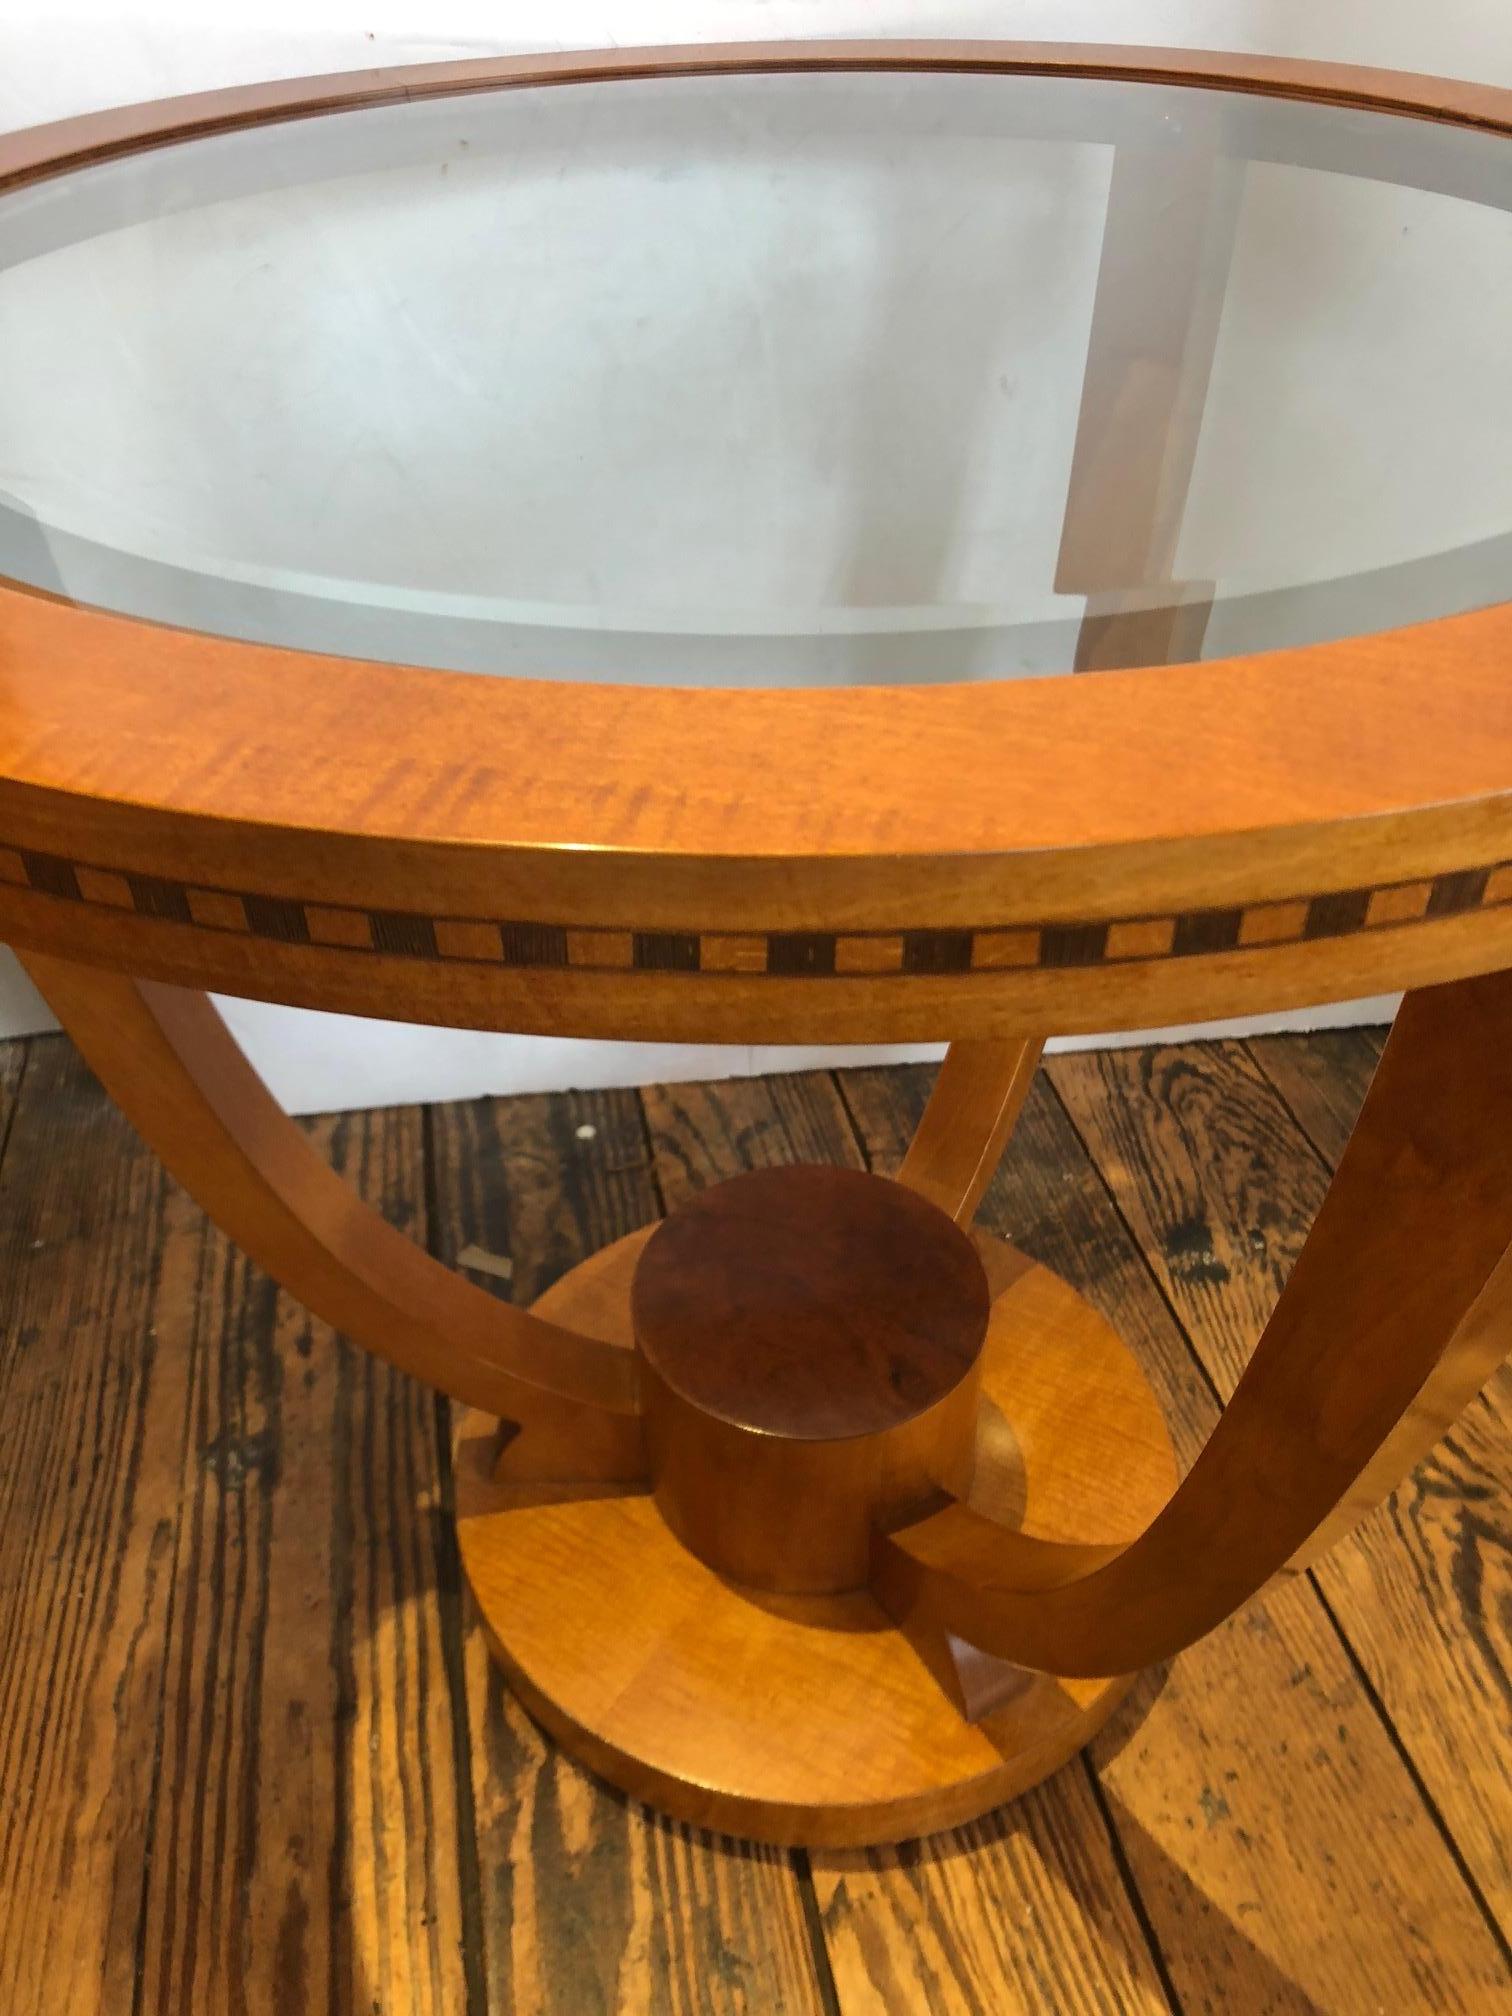 Lovely Art Deco style round end table, a pair is available, having blonde colored high gloss wood with black decorative inlay around the edge and a bevelled glass top. There are 3 curved legs that join at a central cylindrical base at the bottom.